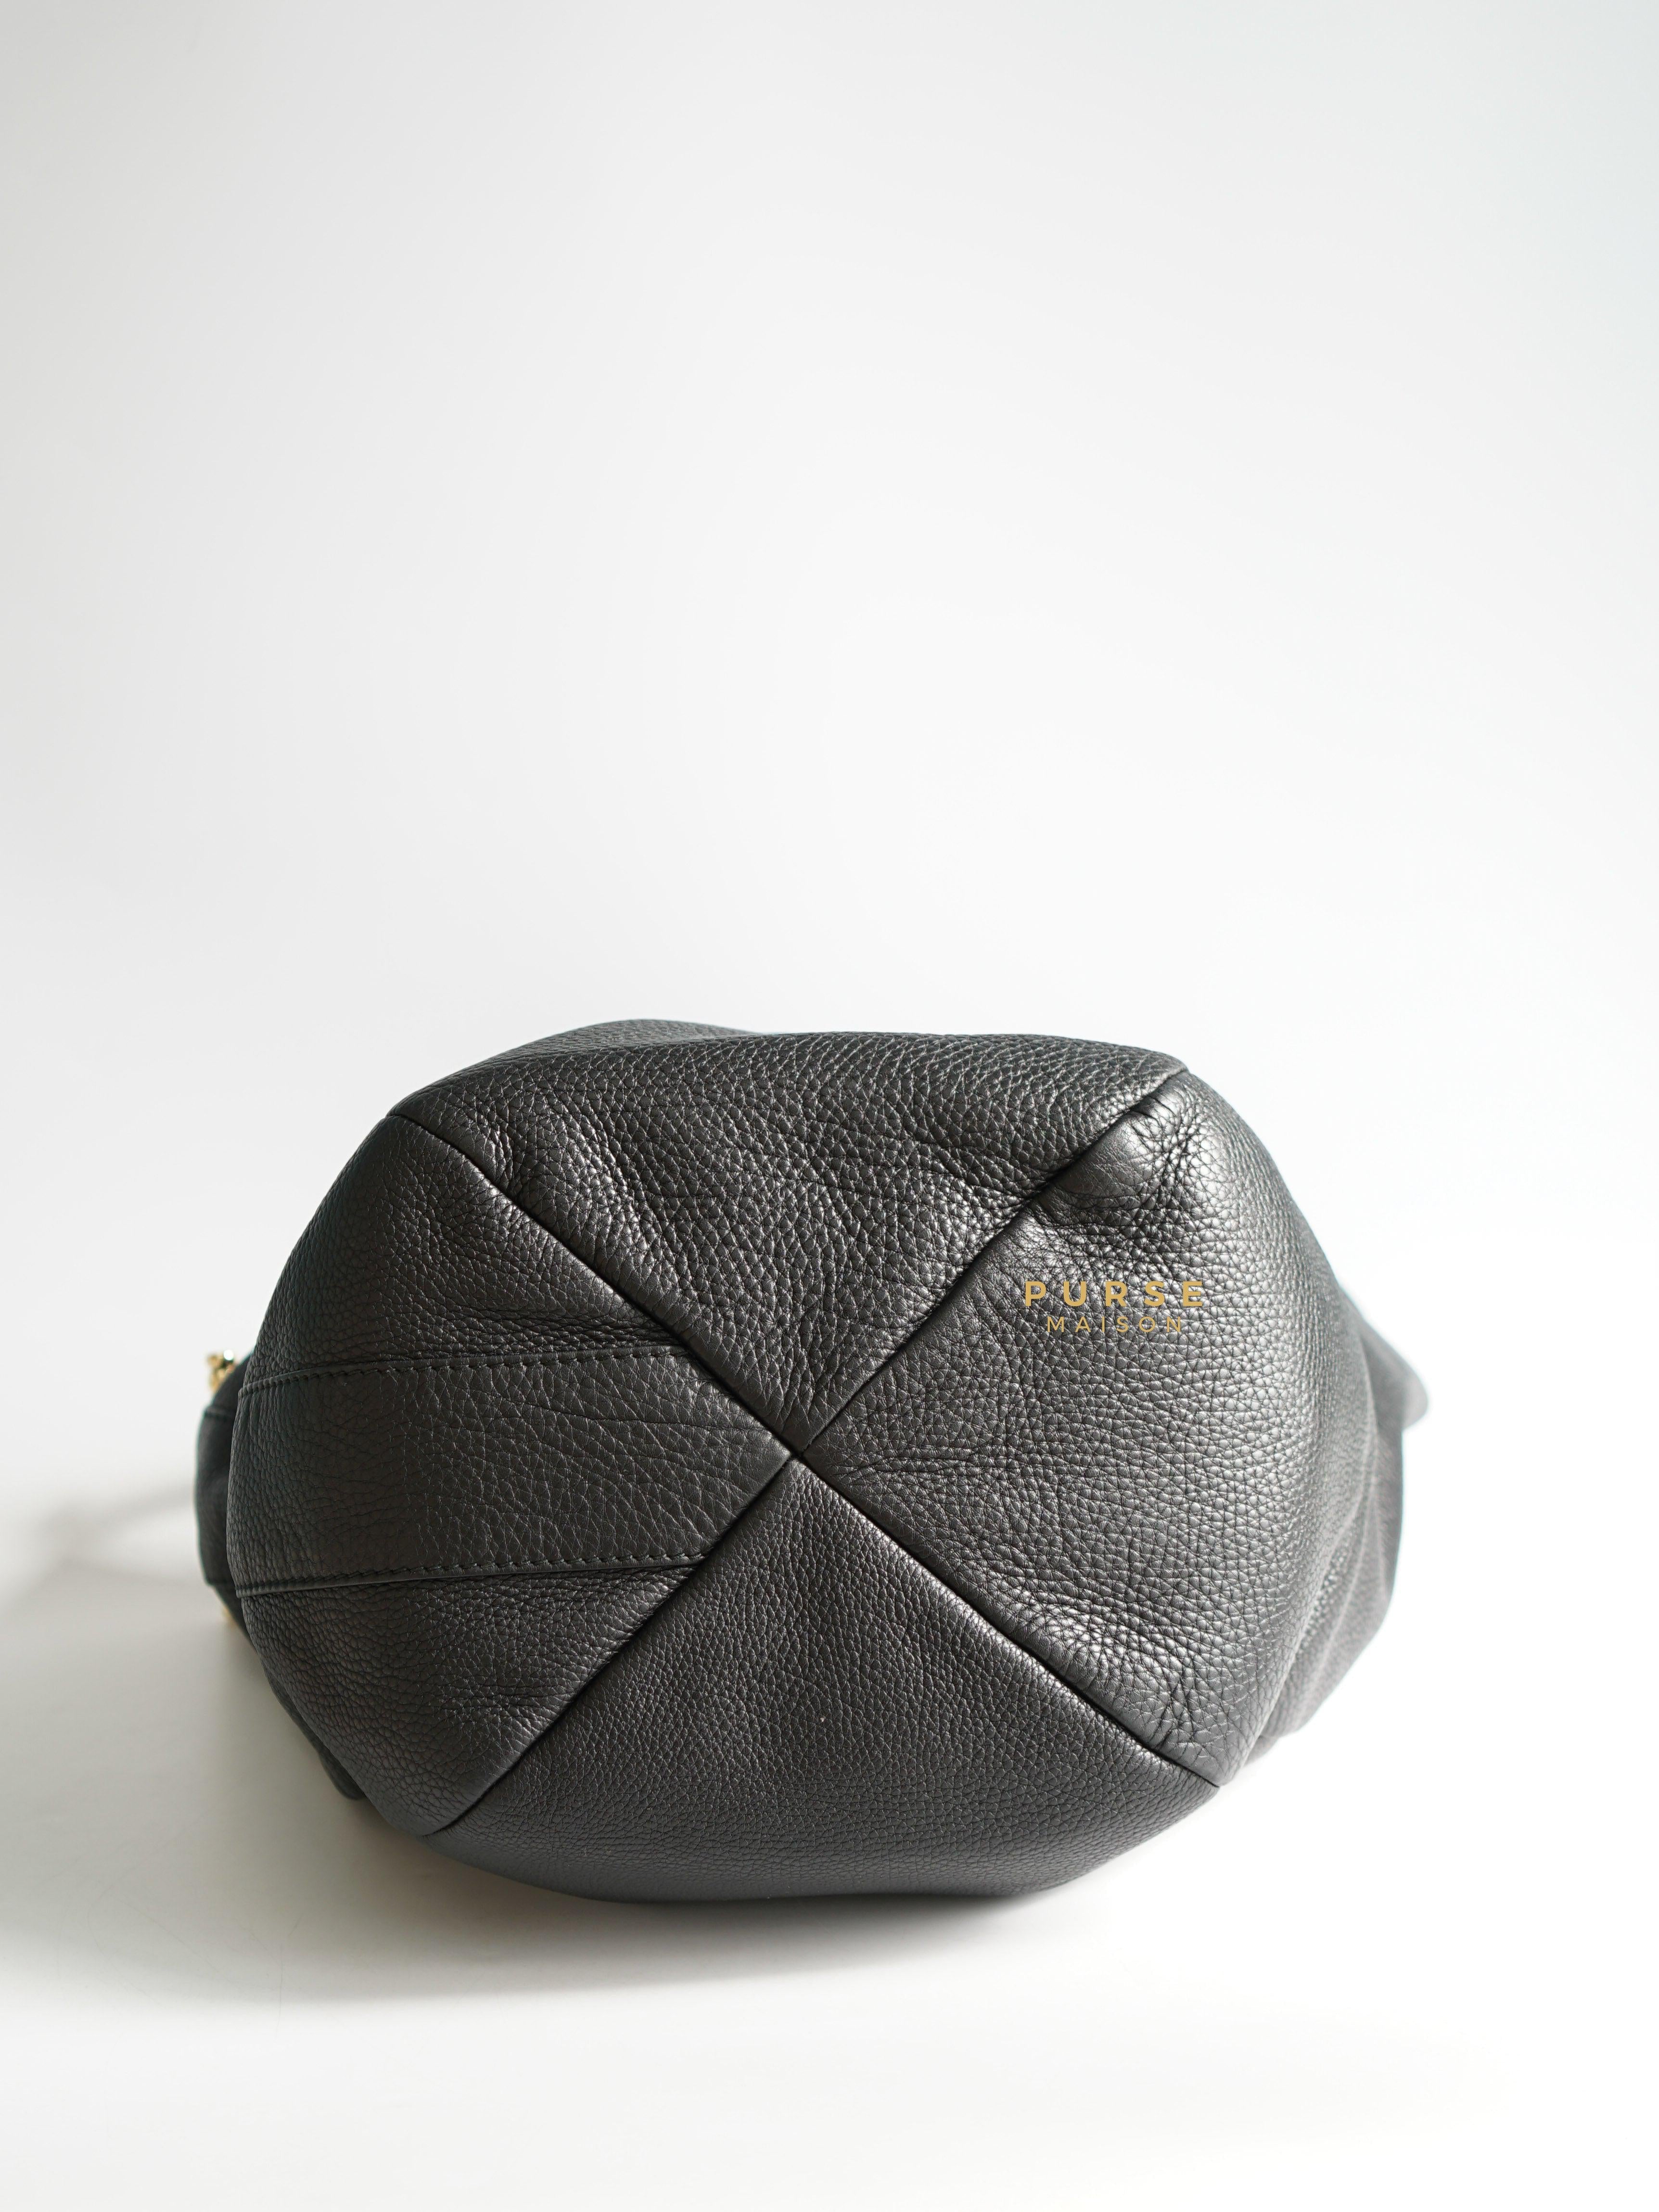 Gucci Greenwich Hobo Large Black Leather | Purse Maison Luxury Bags Shop